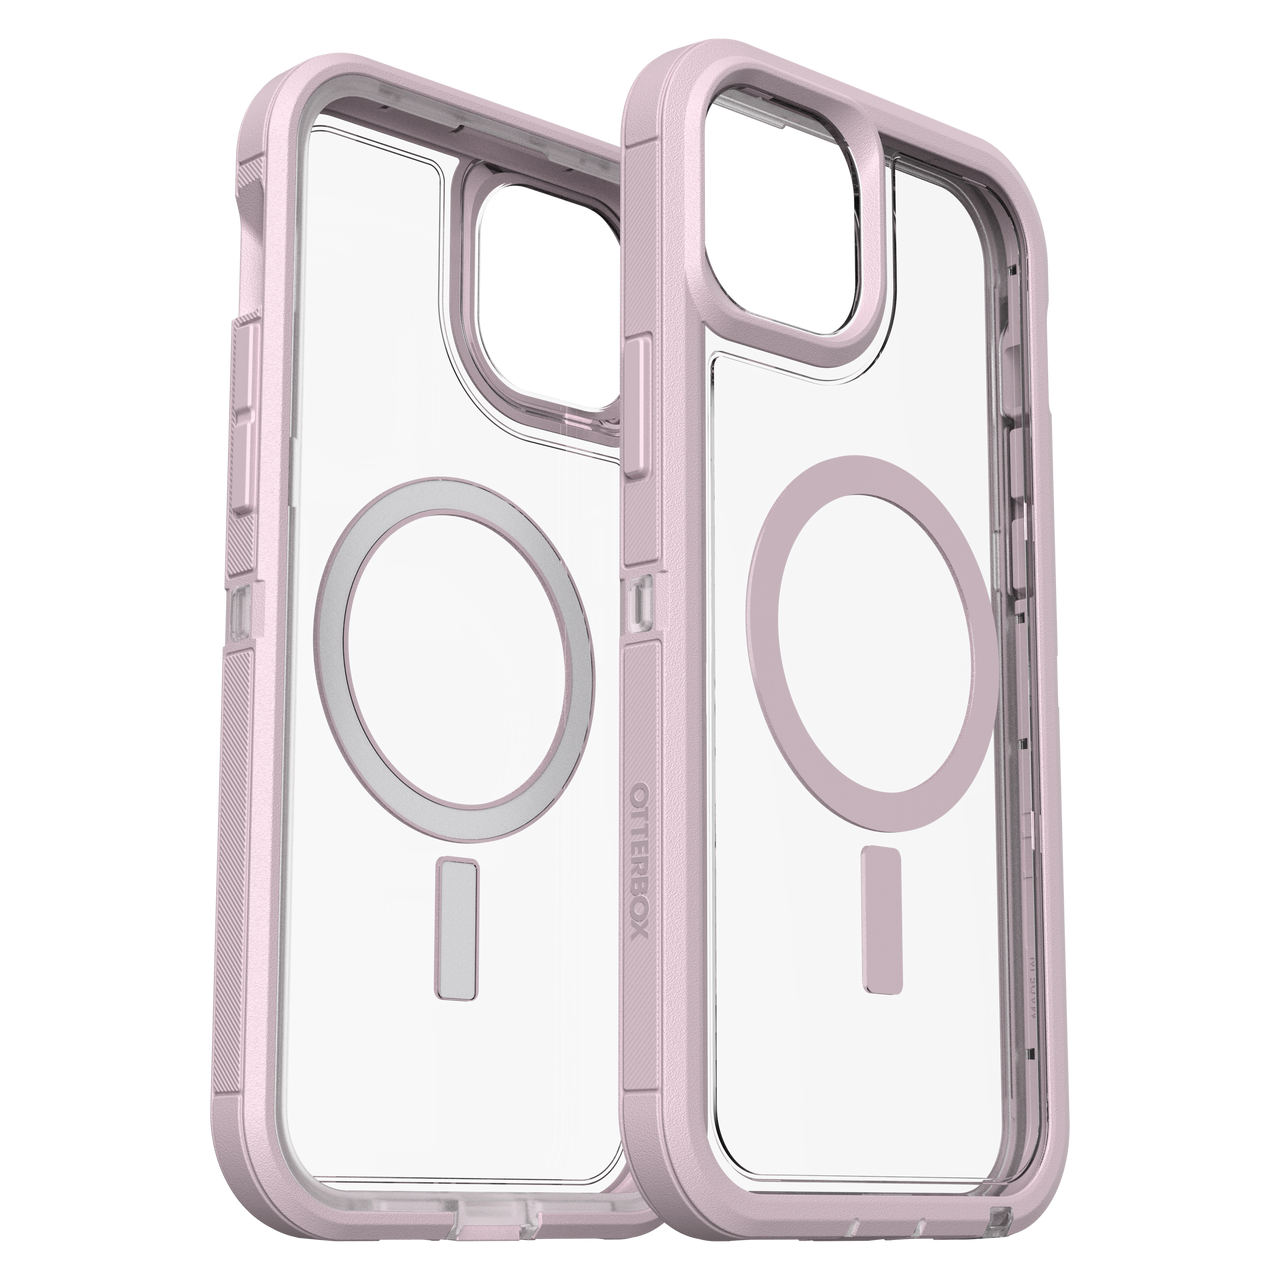 OtterBox  Rugged Case pour Apple AirTag